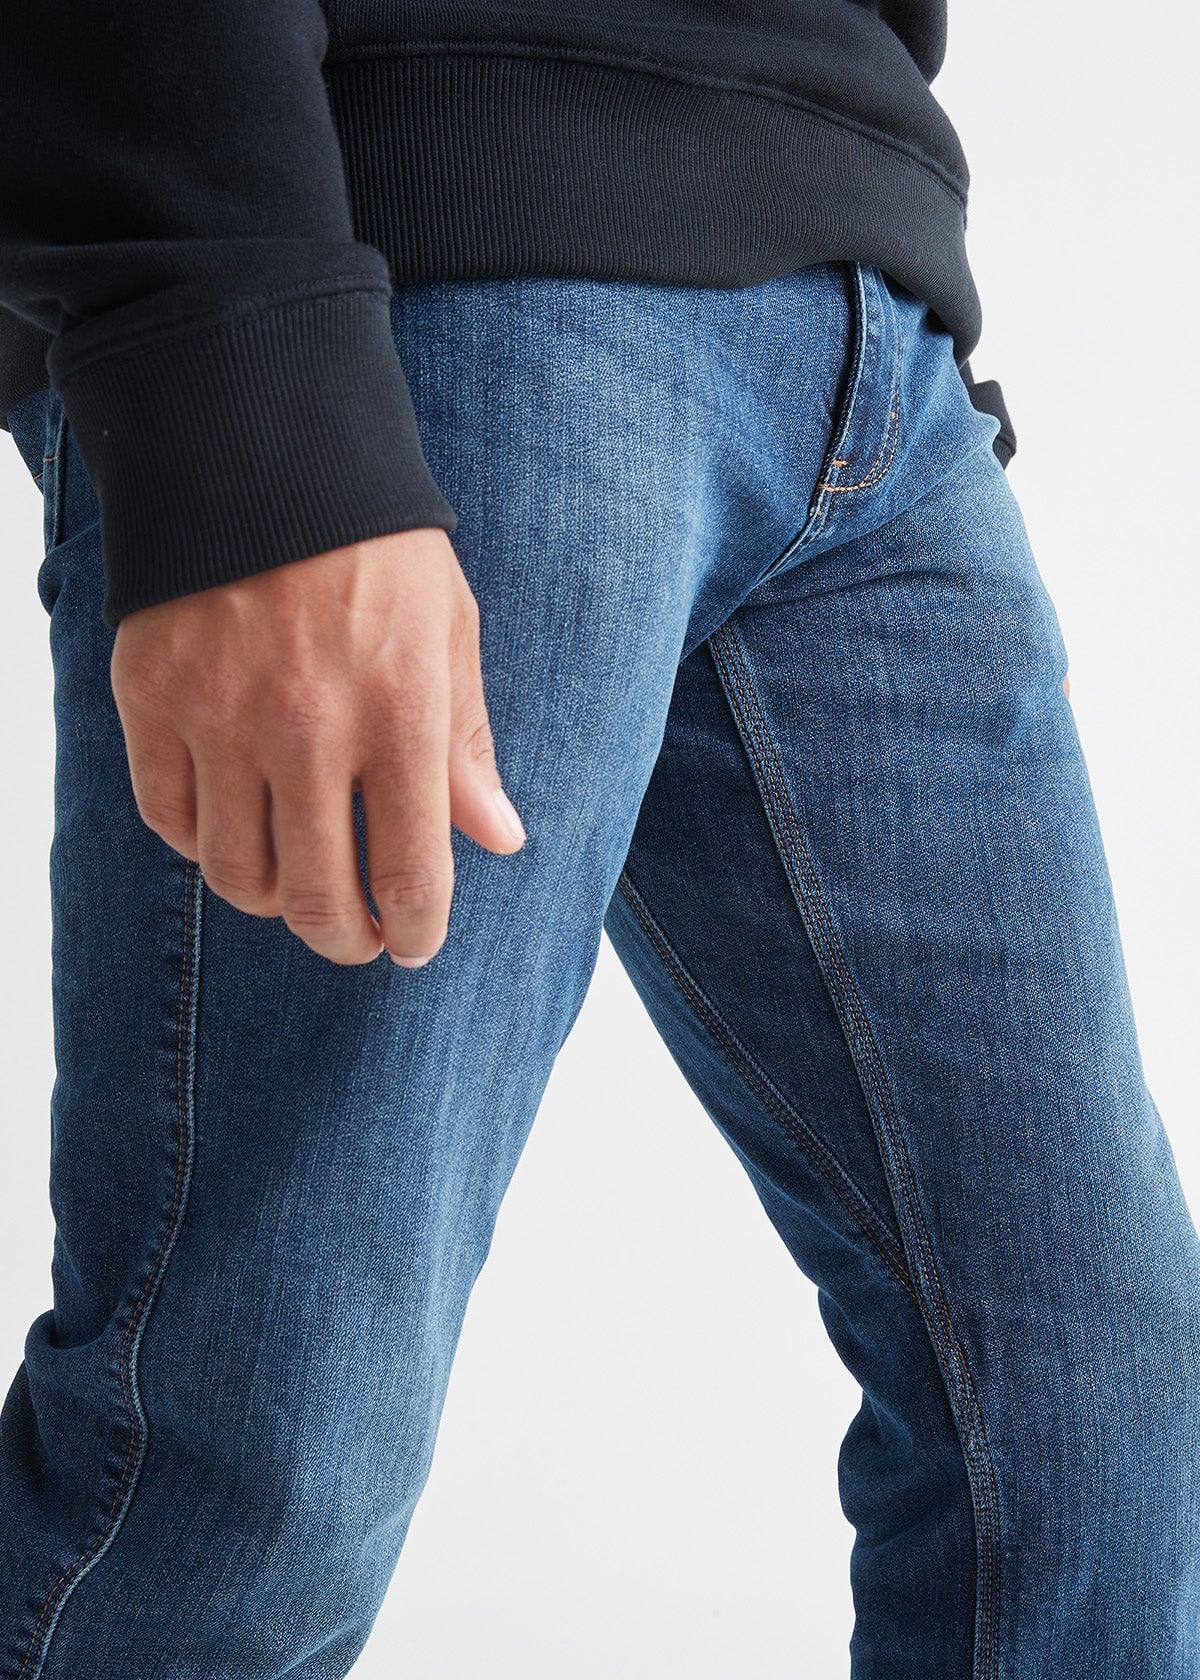 Mens Relaxed Fit Fleece lined Jeans – Insulated Gear